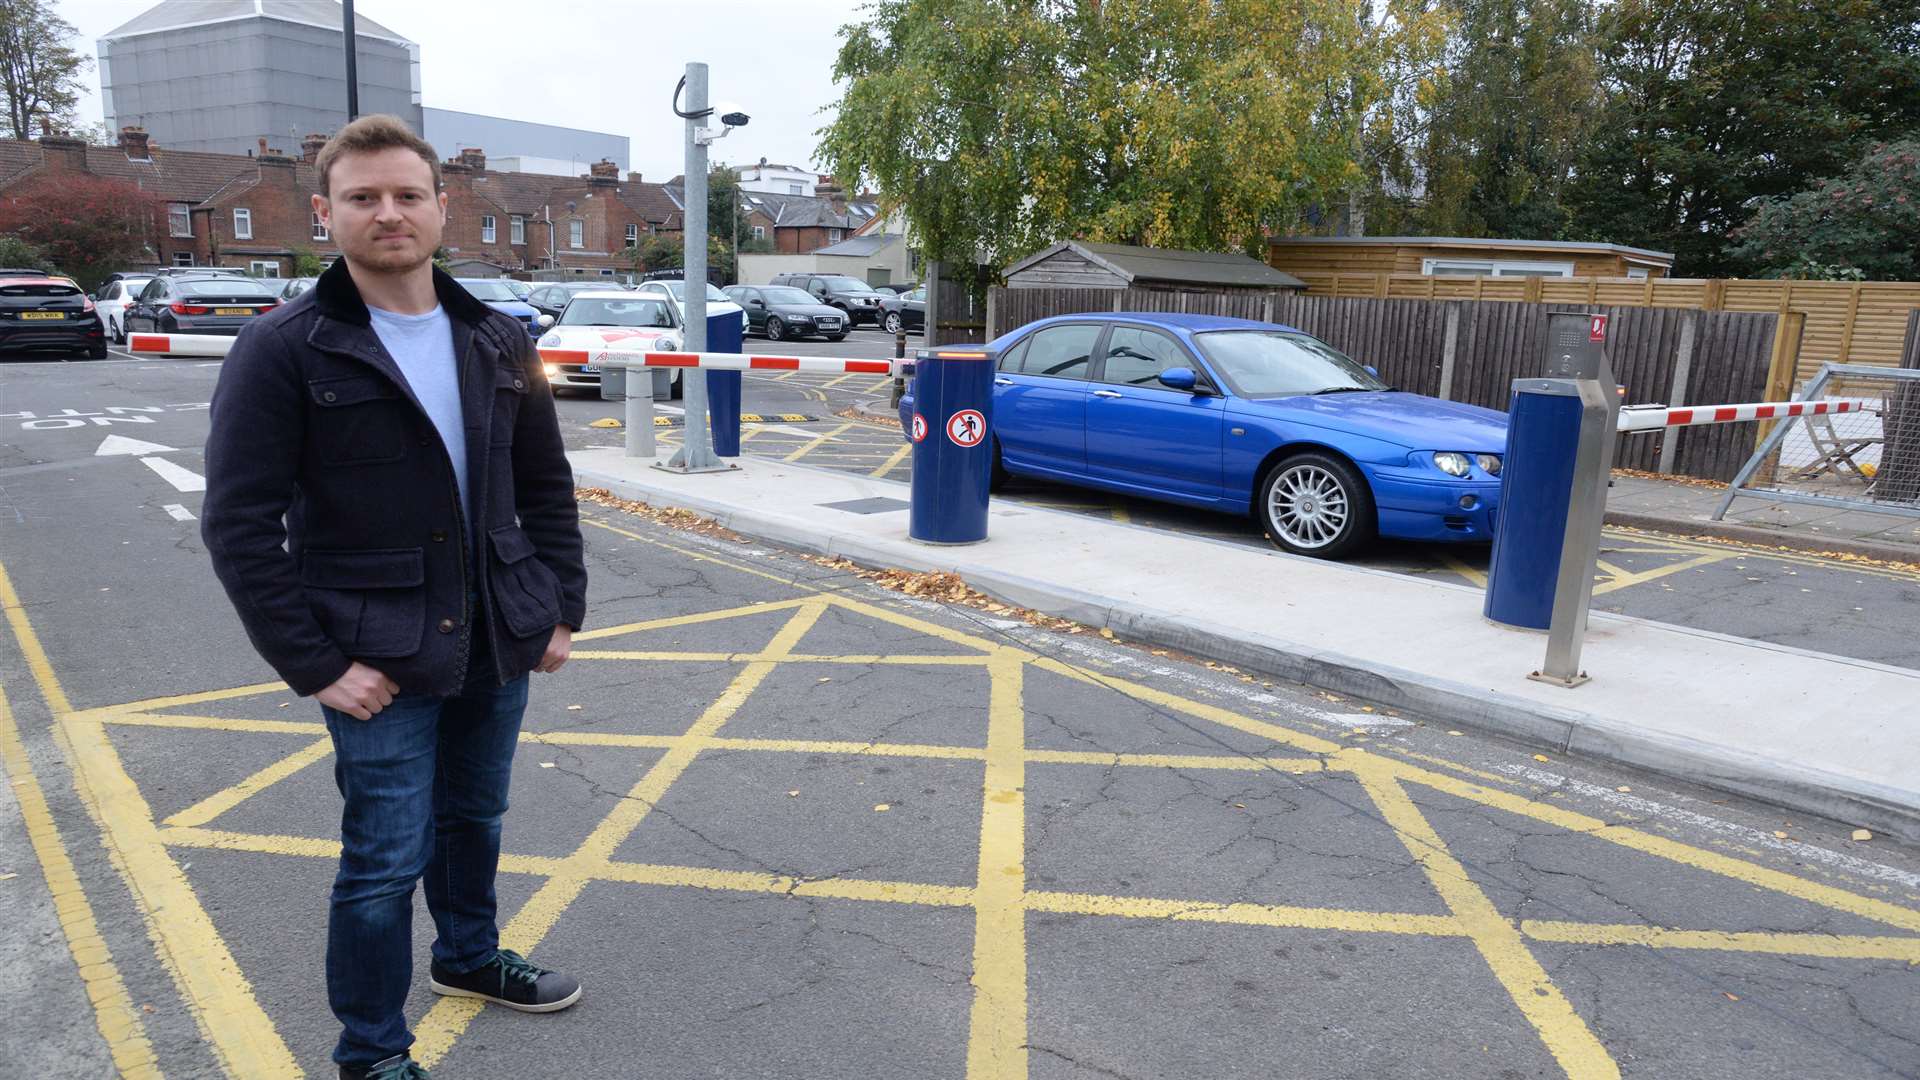 Cllr Ben Fitter-Harding and the ANPR barriers at the Pound Lane car park in Canterbury